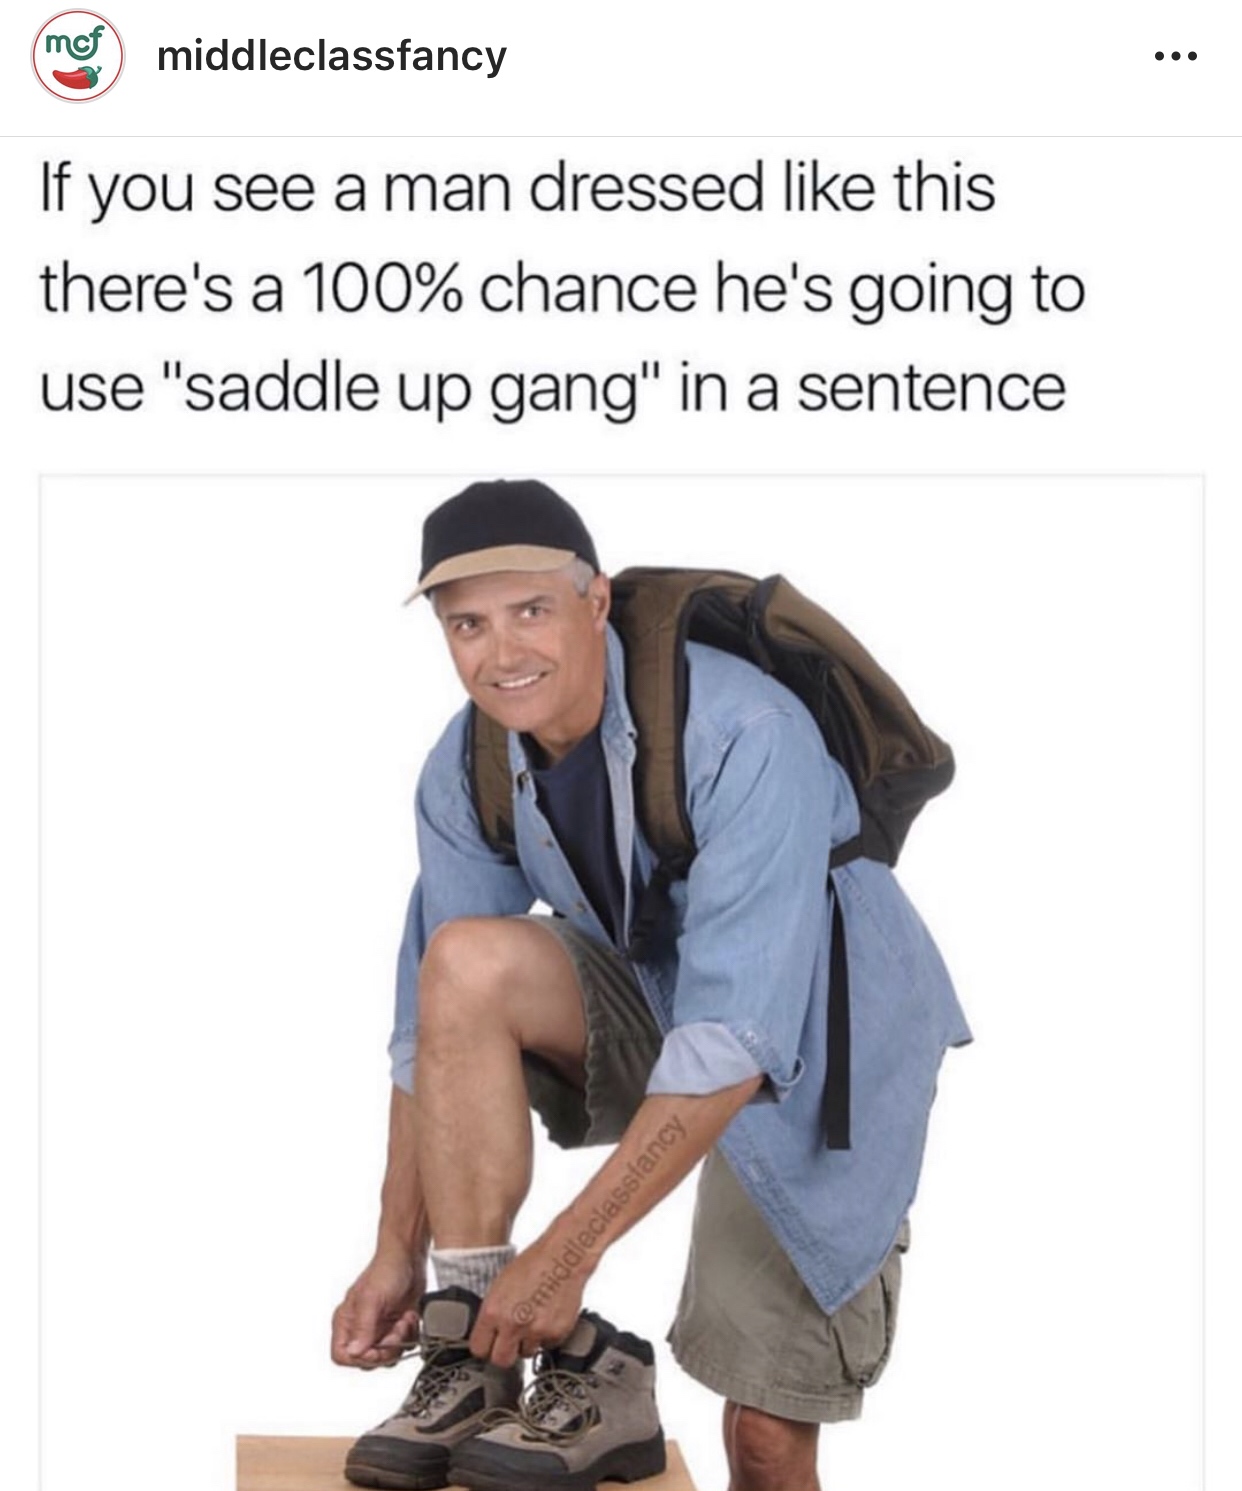 middle class fancy meme - mof middleclassfancy If you see a man dressed this there's a 100% chance he's going to use "saddle up gang" in a sentence